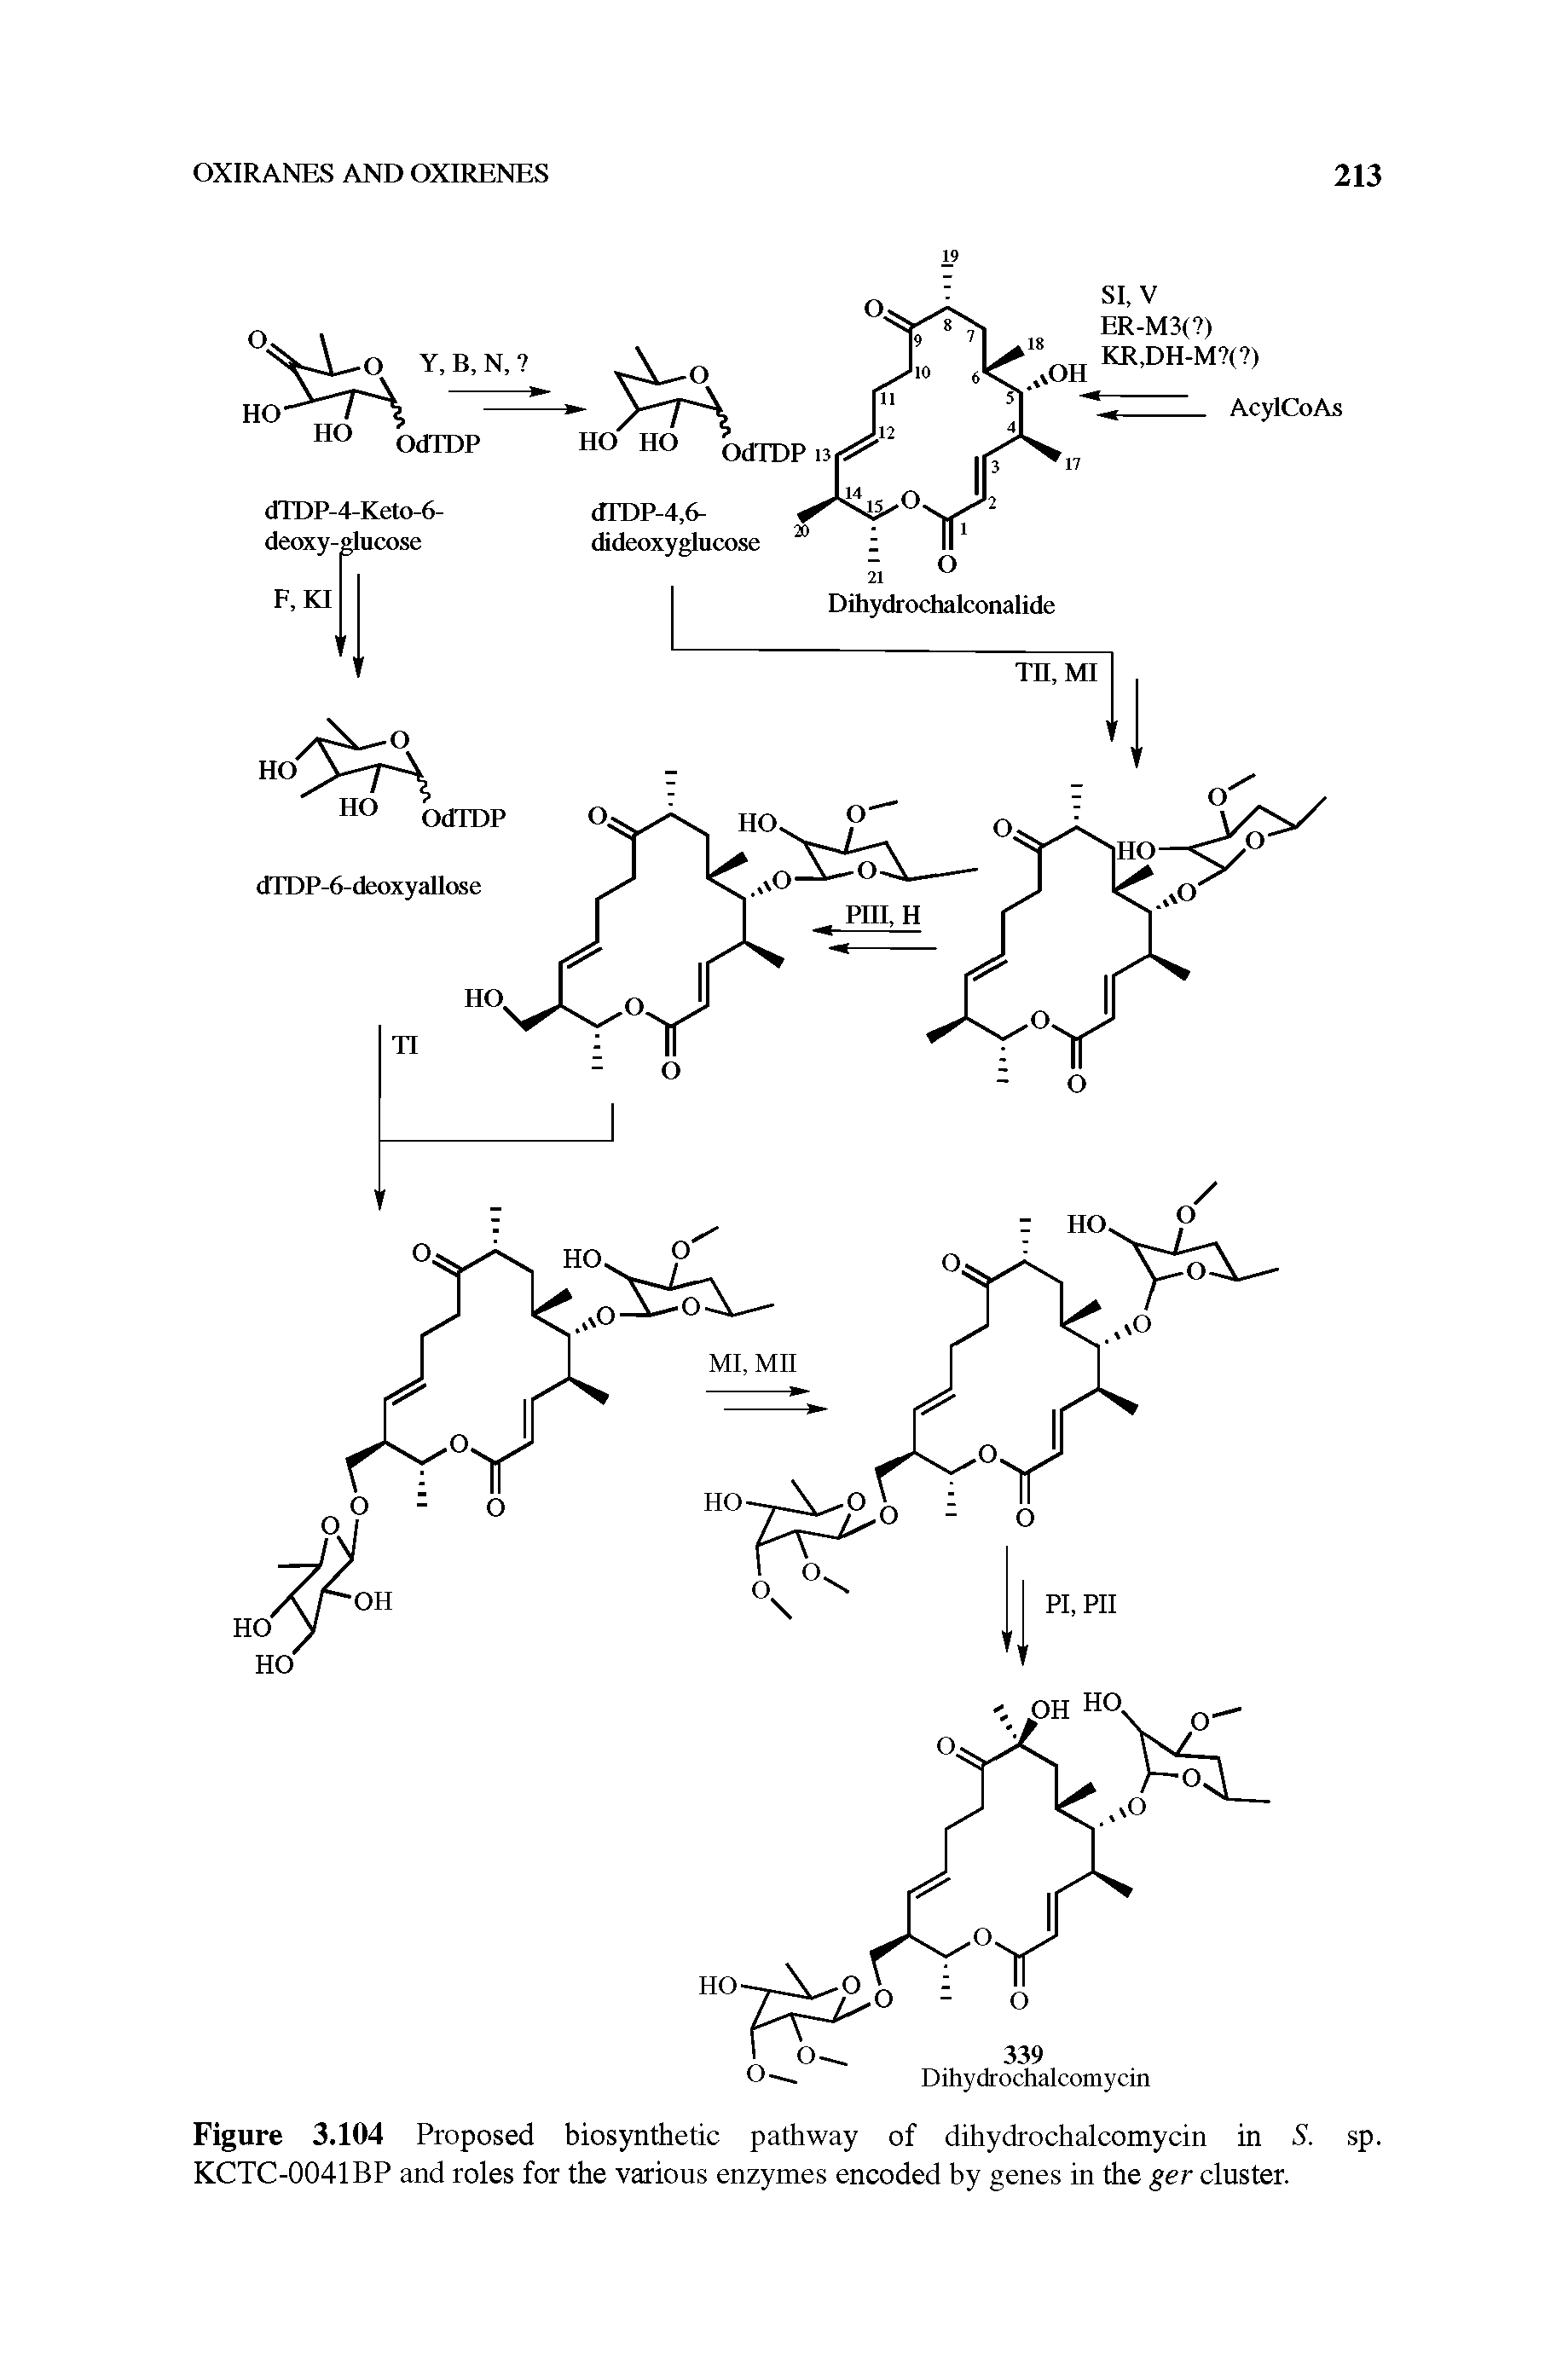 Figure 3.104 Proposed biosynthetic pathway of dihydrochalcomycin in S. sp. KCTC-0041BP and roles for the various enzymes encoded by genes in the ger cluster.